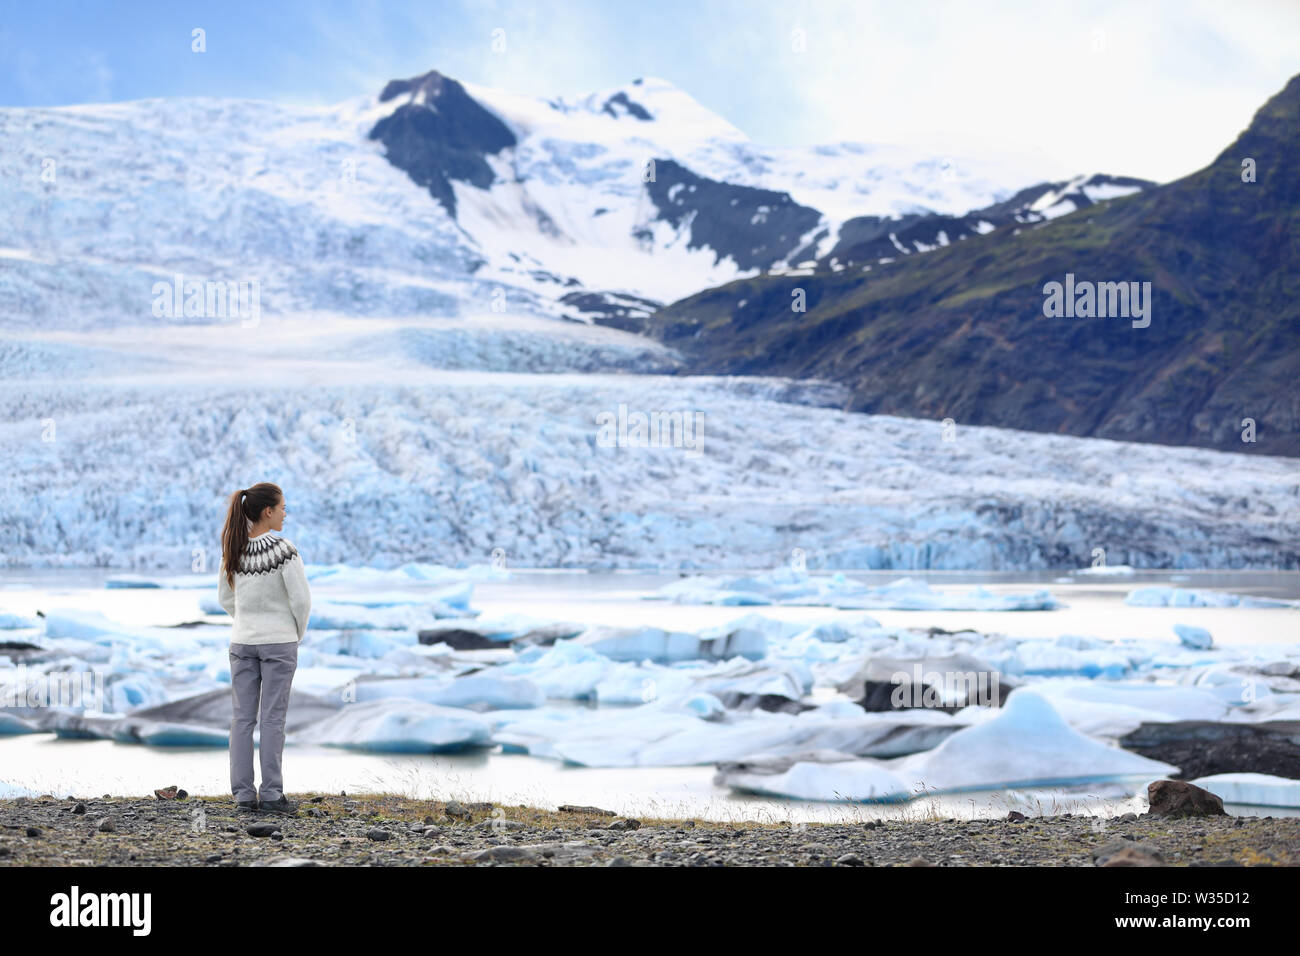 Adventure woman by glacier nature on Iceland. Tourist in Icelandic sweater by glacial lagoon / lake of Fjallsarlon, Vatna glacier, Vatnajokull National Park. Young woman visiting nature landscape. Stock Photo